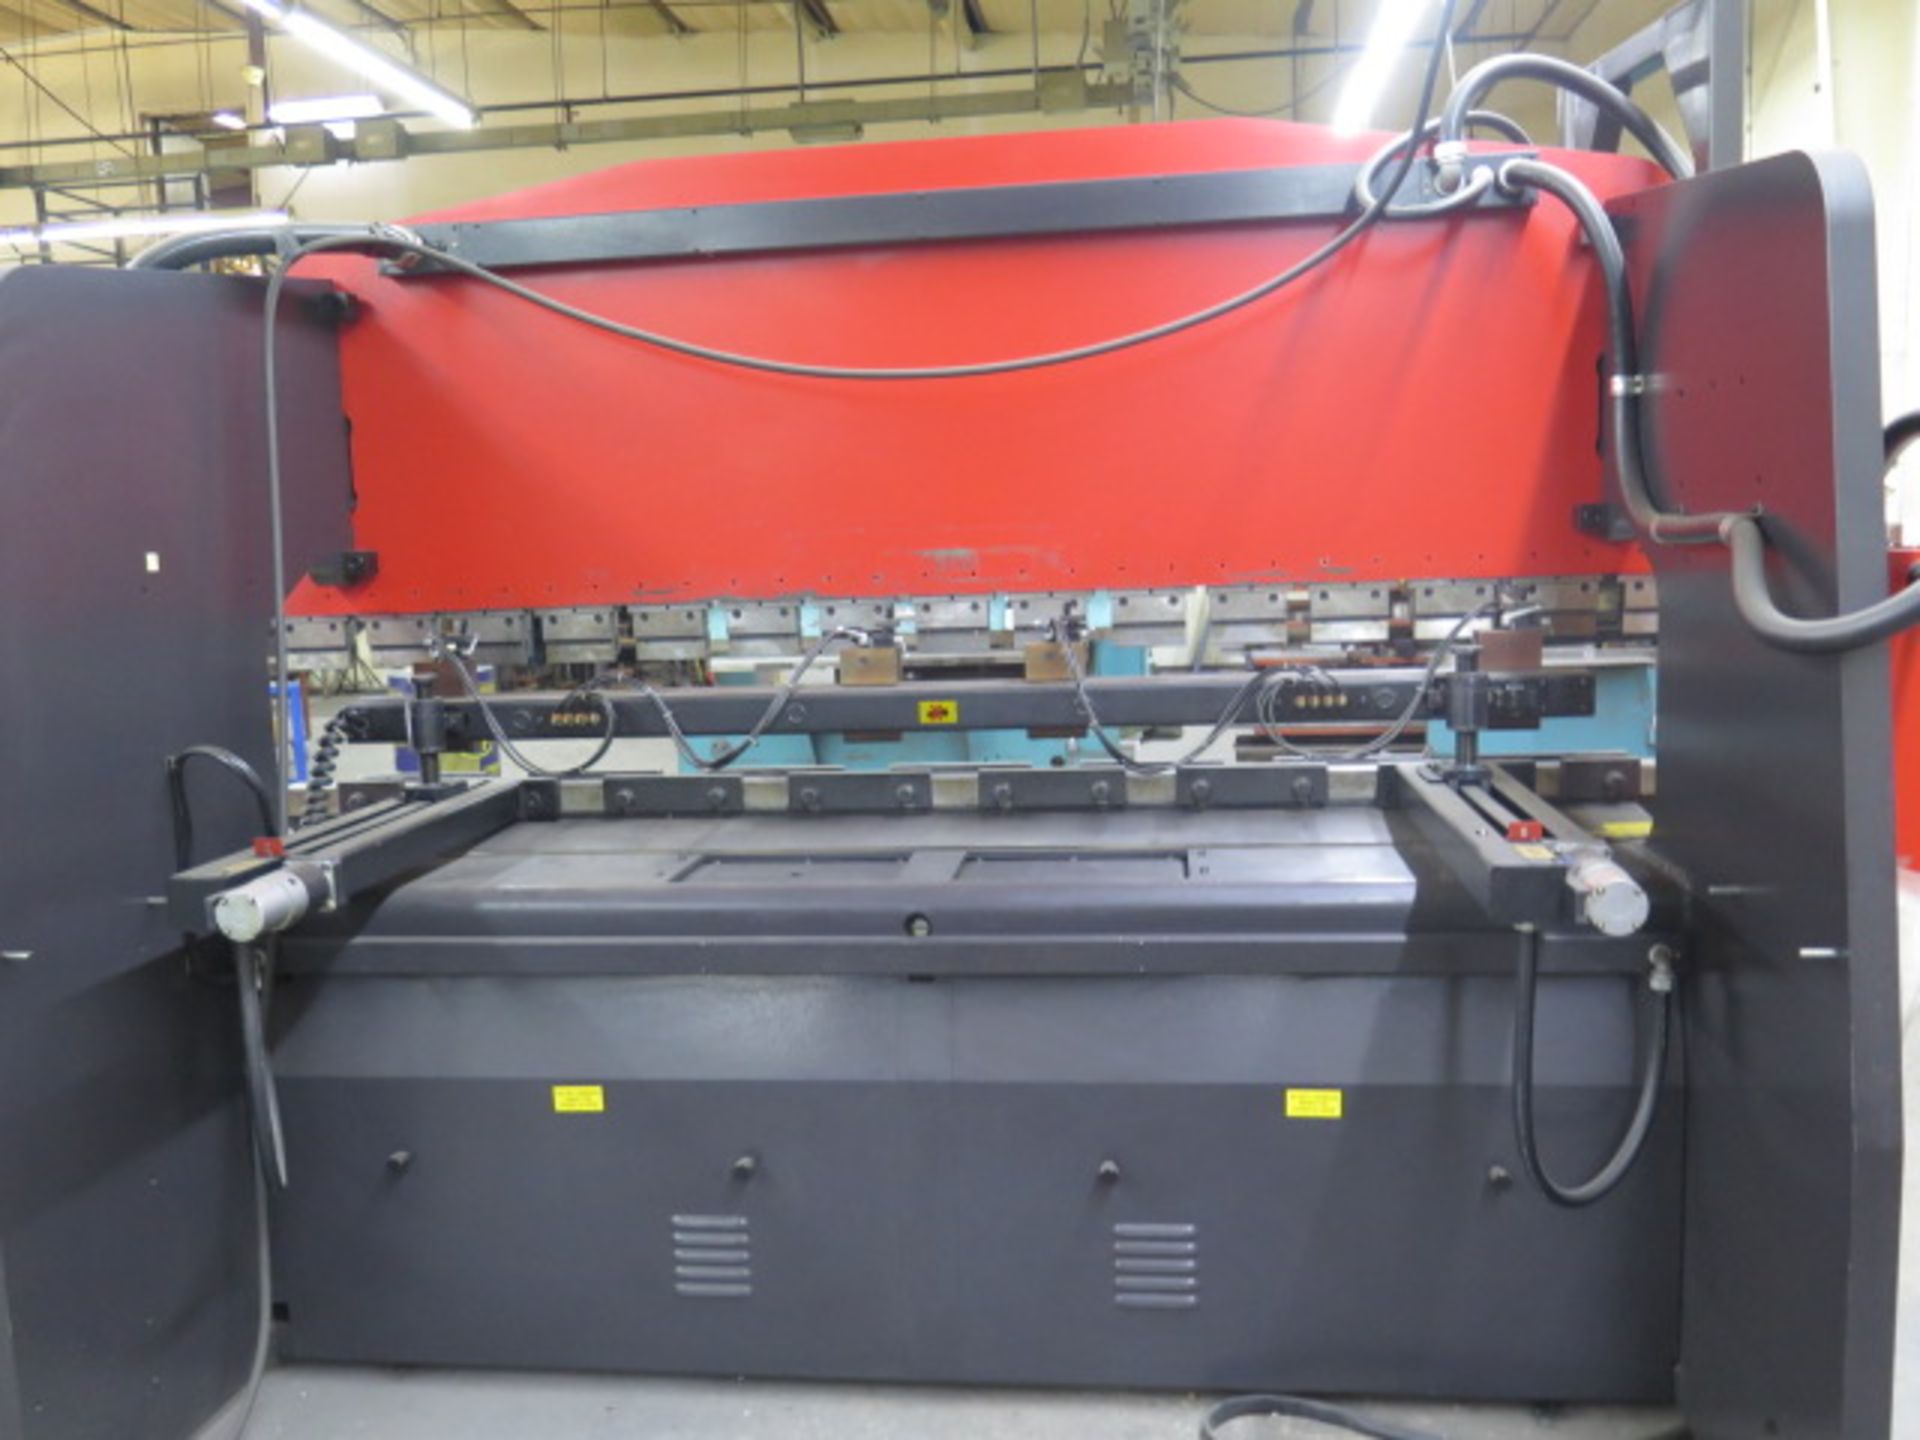 Amada RG100 100 Ton x 10’ CNC Press Brake s/n 105240 w/ NC9-EX II 3 AXIS Controls, SOLD AS IS - Image 7 of 20